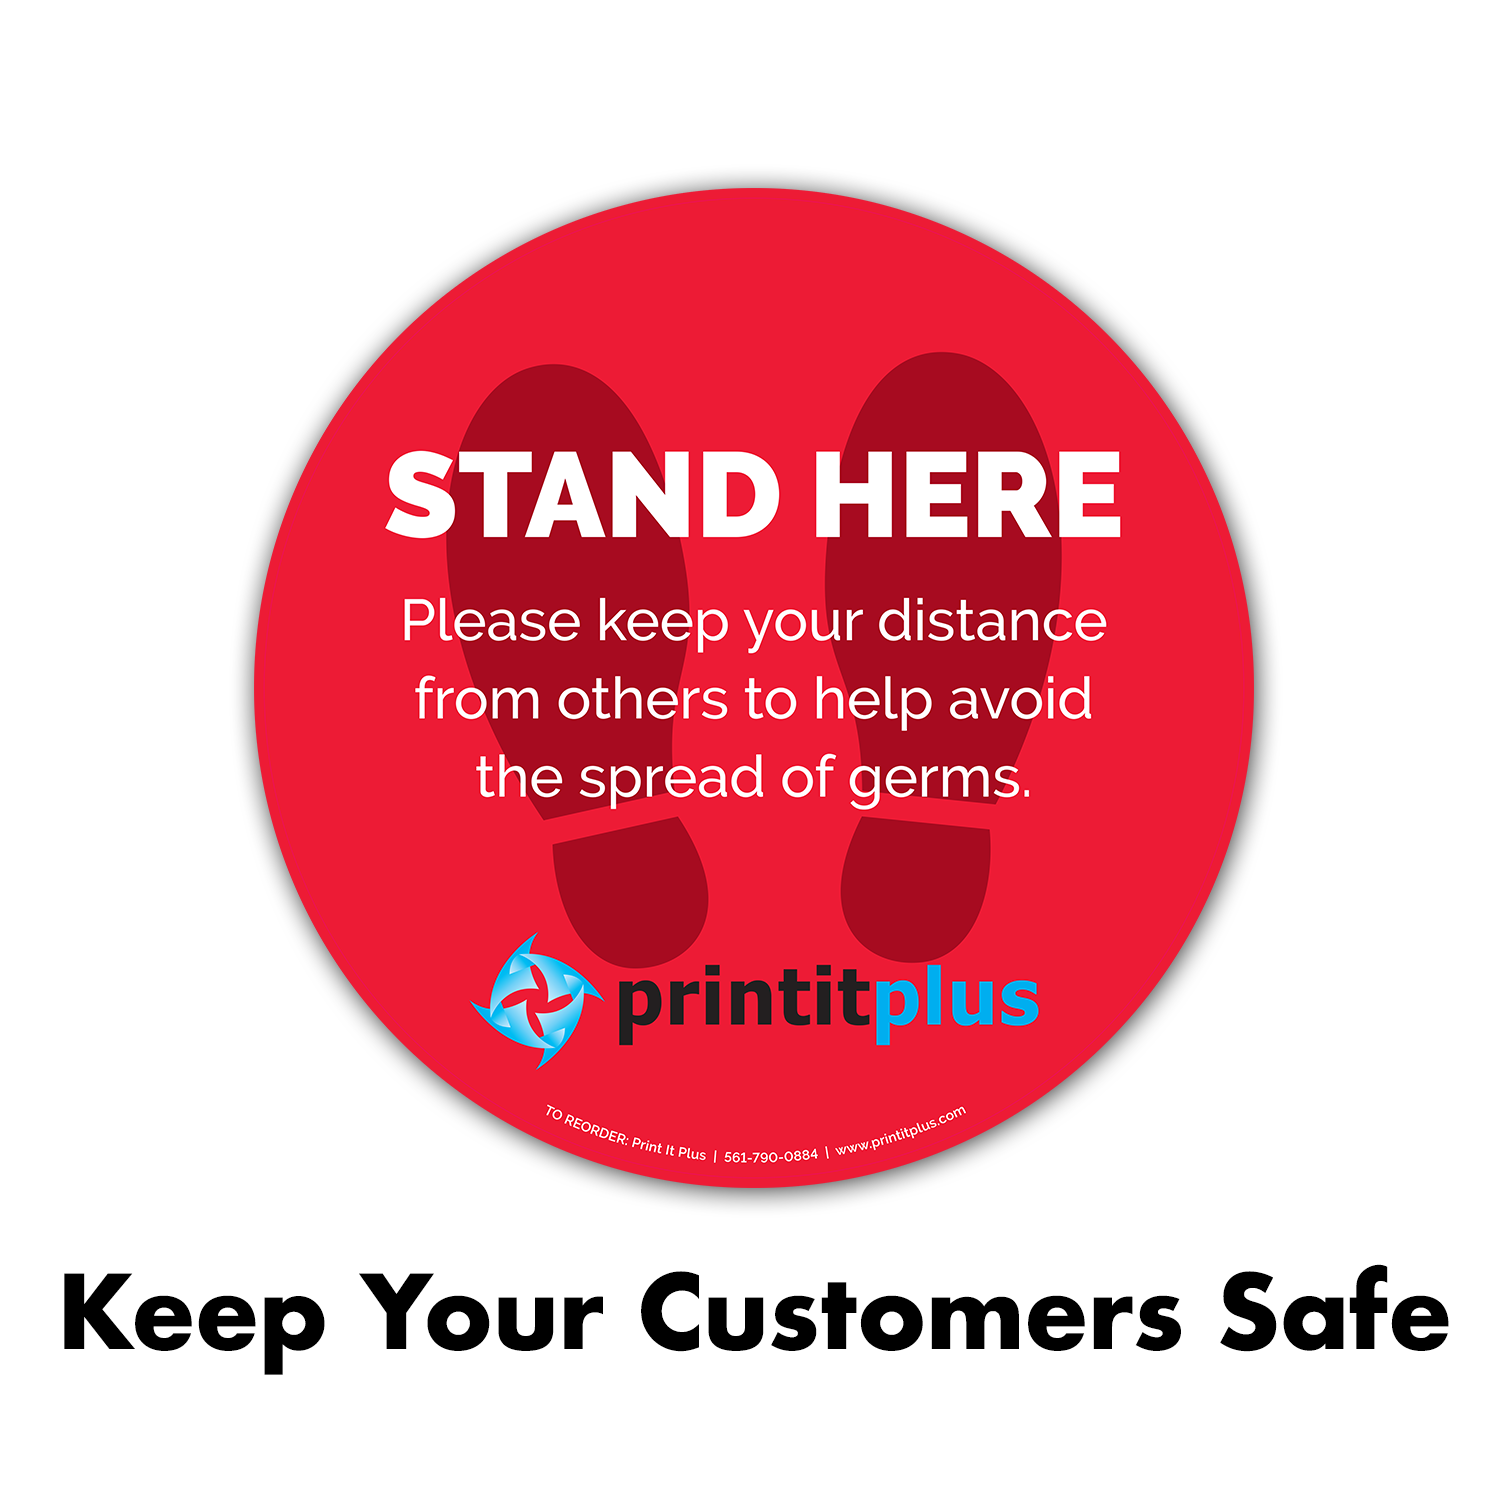 Keep Your Customers Safe